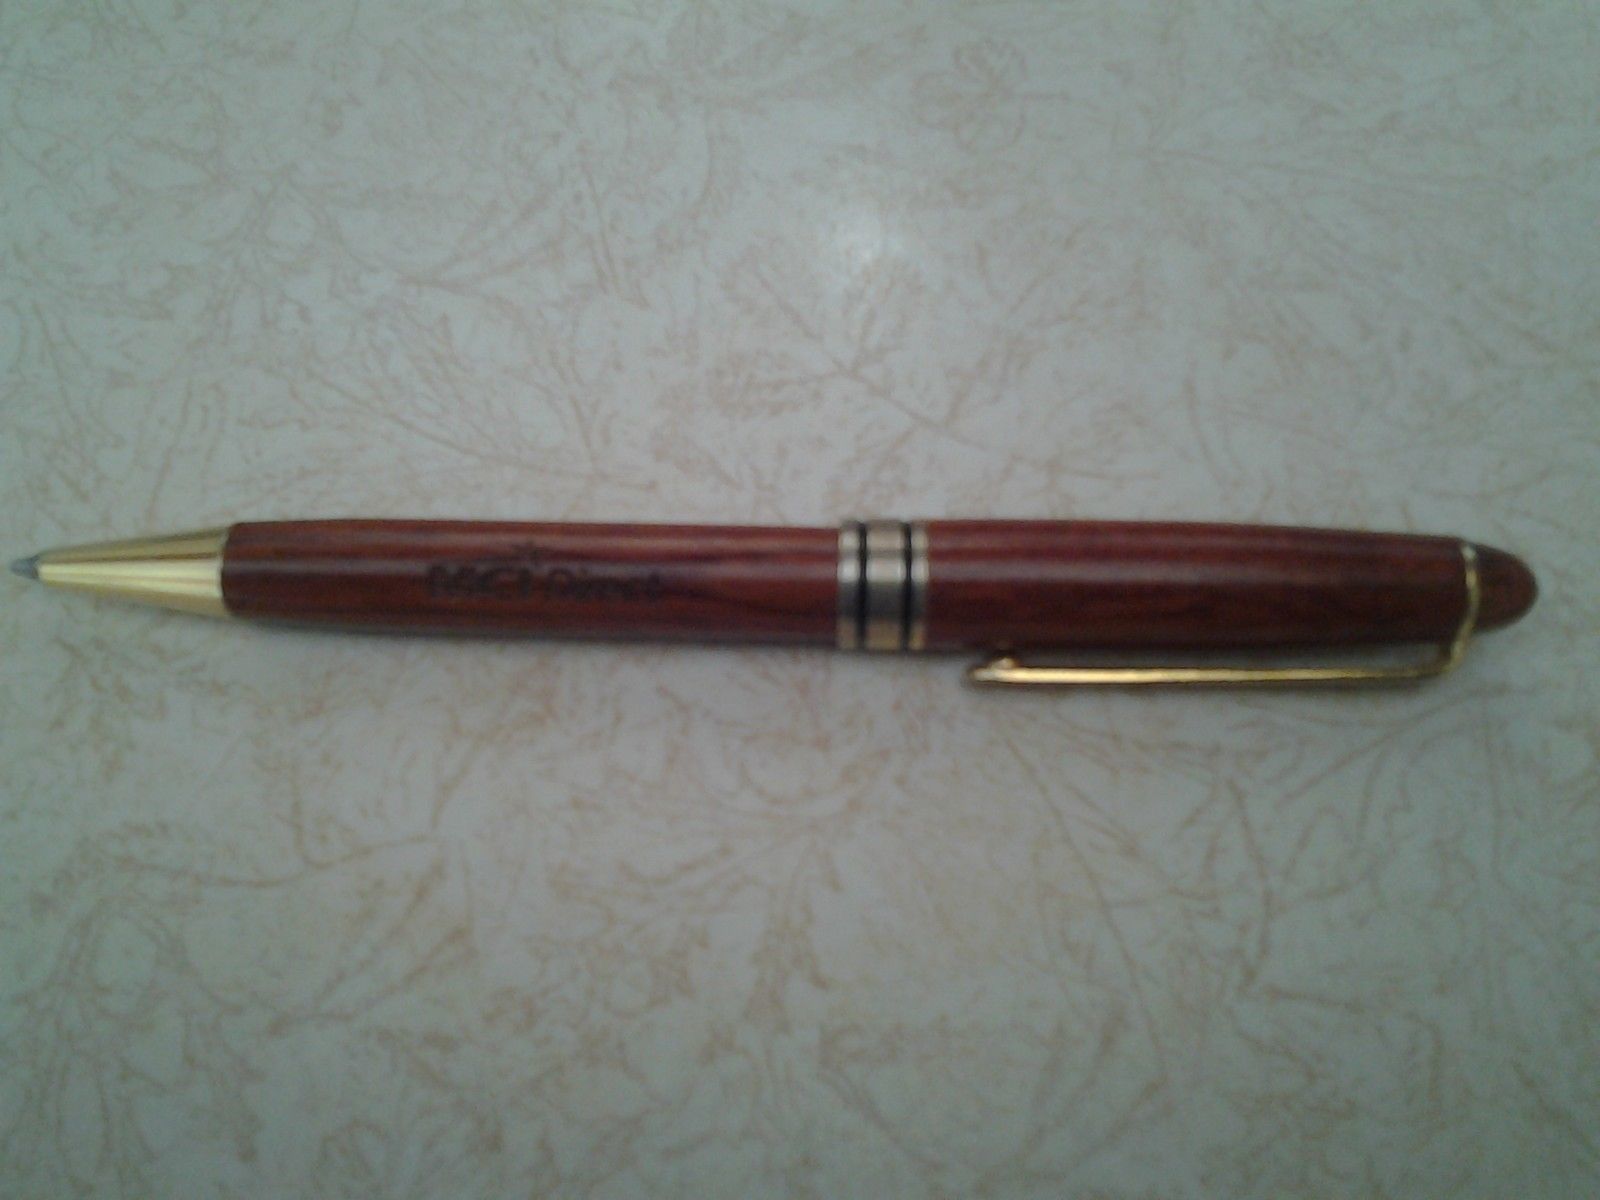 Unique Wood Pen Branded MCI Direct  with Gold accents, Turn top to write - $14.30